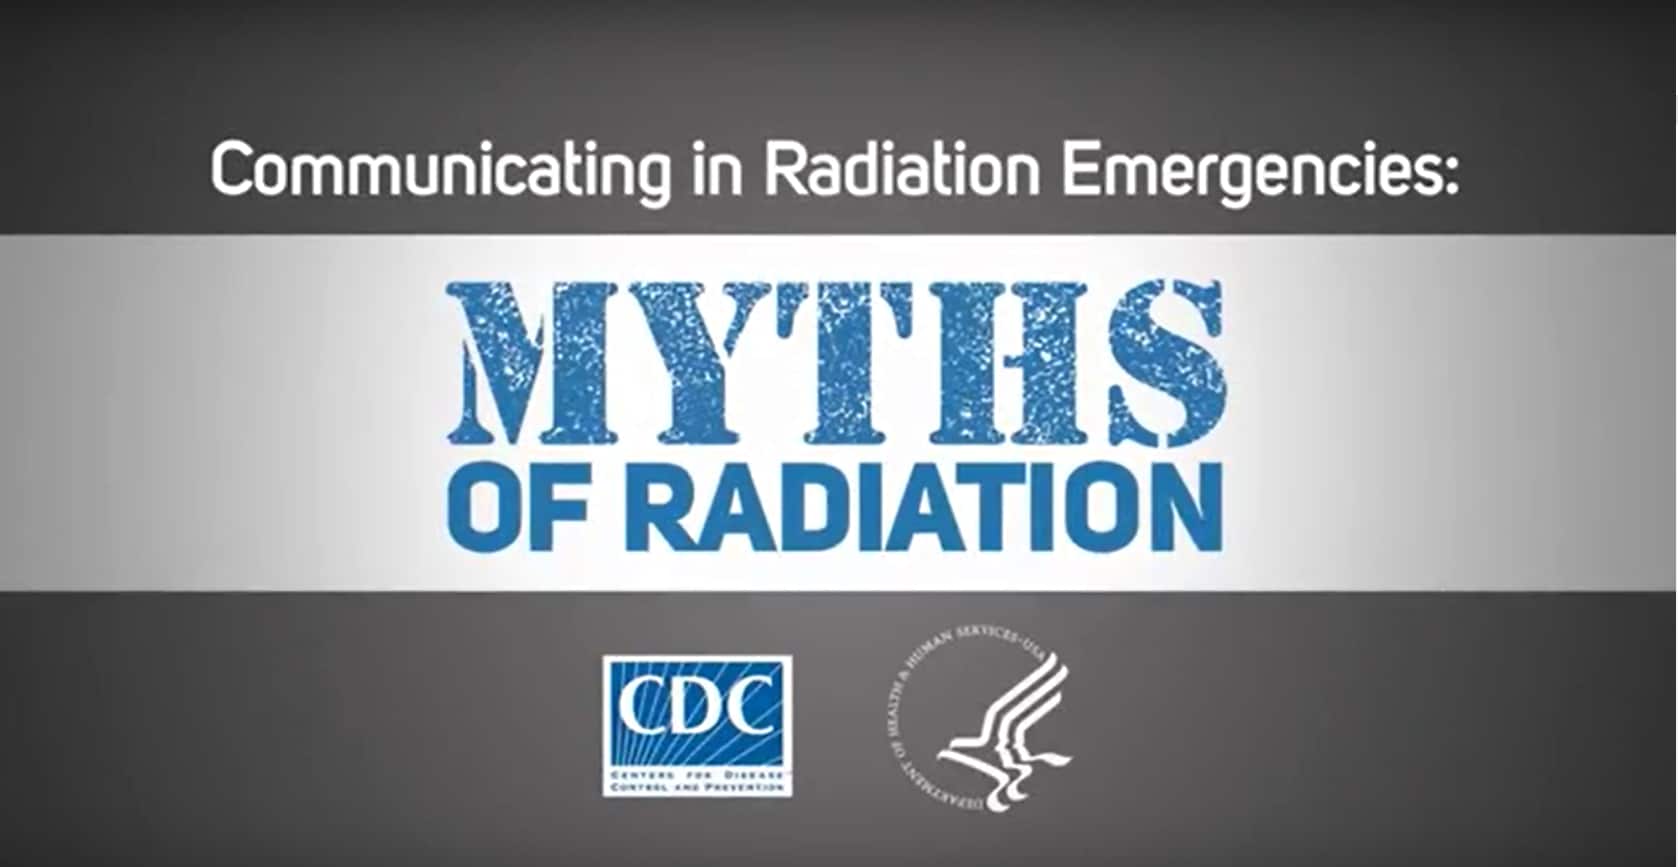 Video cover slide. Text says "Myths of Radiation: Communicating in a Radiation Emergency"